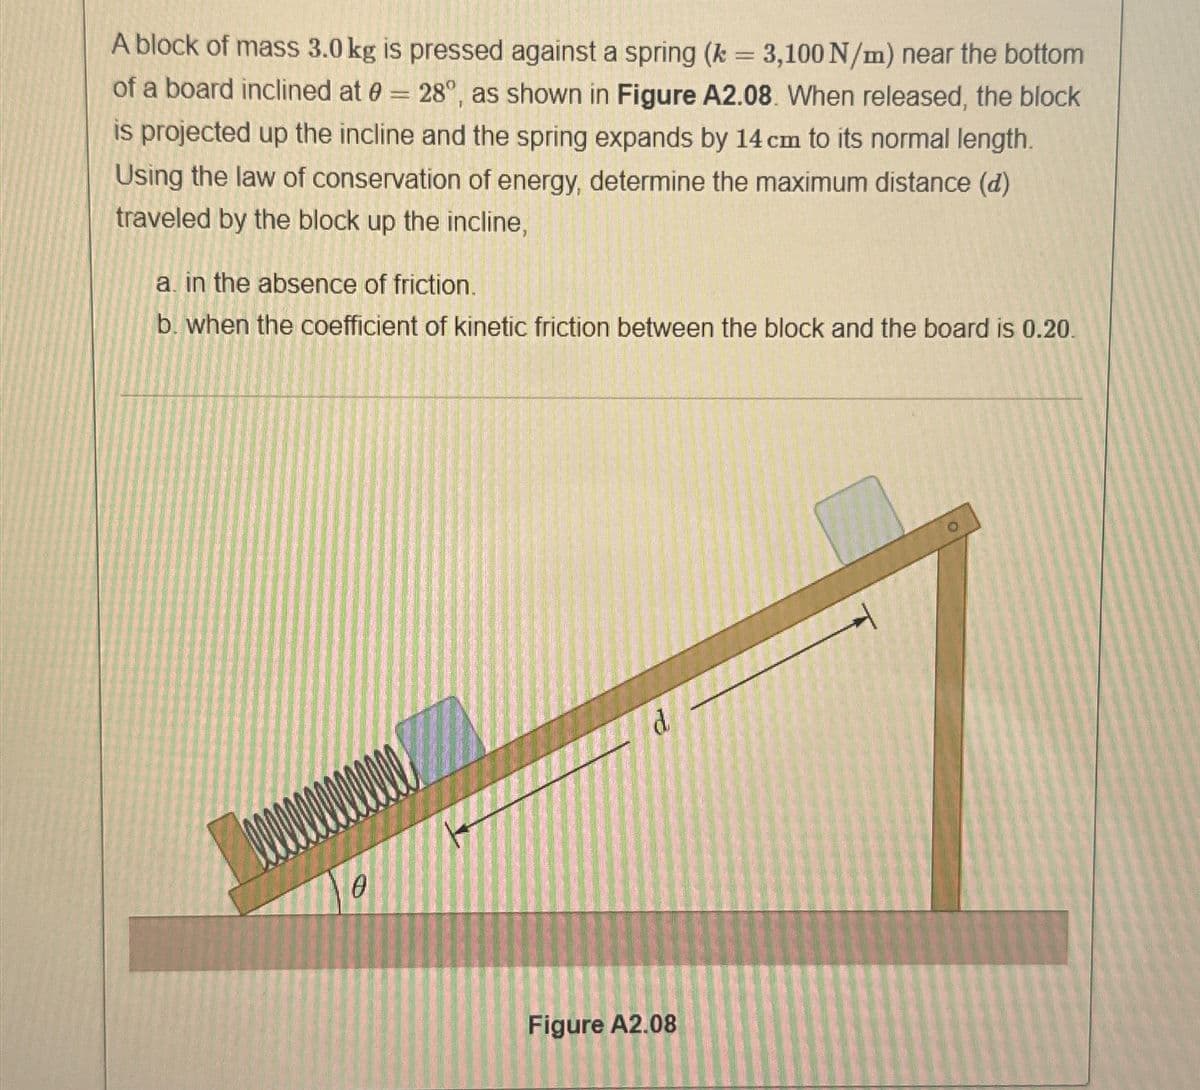 A block of mass 3.0 kg is pressed against a spring (k = 3,100 N/m) near the bottom
of a board inclined at = 28°, as shown in Figure A2.08. When released, the block
is projected up the incline and the spring expands by 14 cm to its normal length.
Using the law of conservation of energy, determine the maximum distance (d)
traveled by the block up the incline,
a. in the absence of friction.
b. when the coefficient of kinetic friction between the block and the board is 0.20.
0
Figure A2.08
d